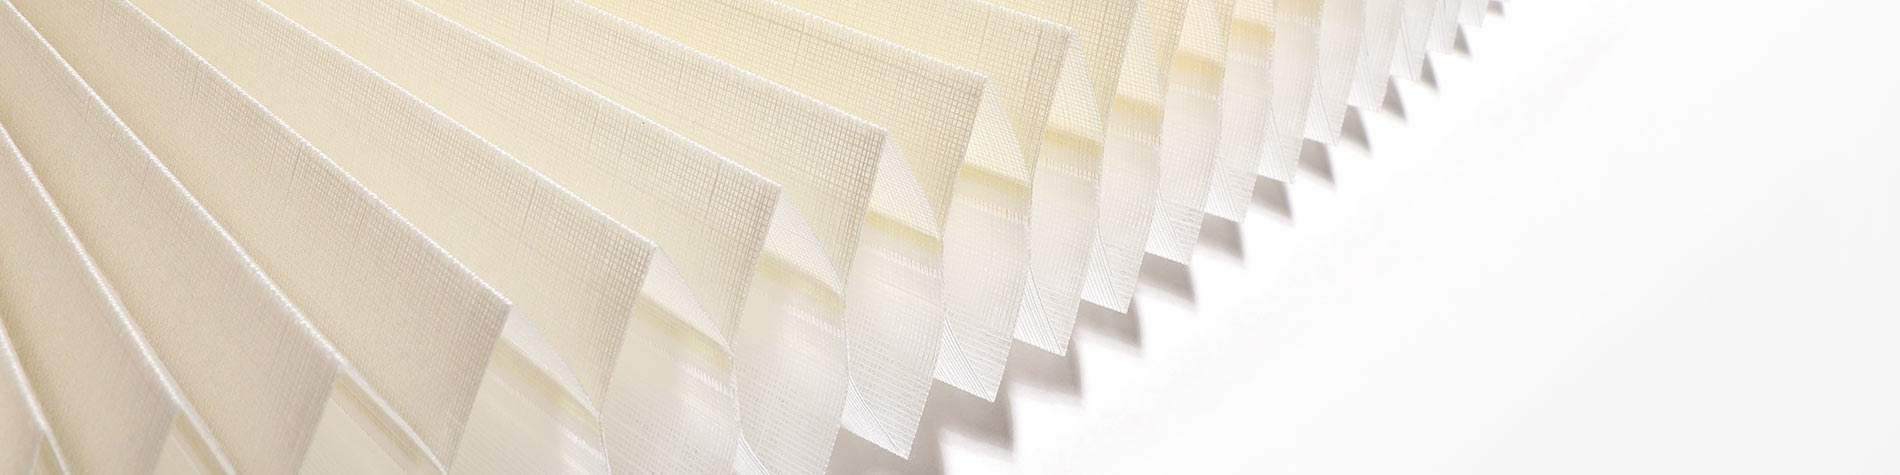 Soft, easy care cellular shade fabric beautifully filters light.